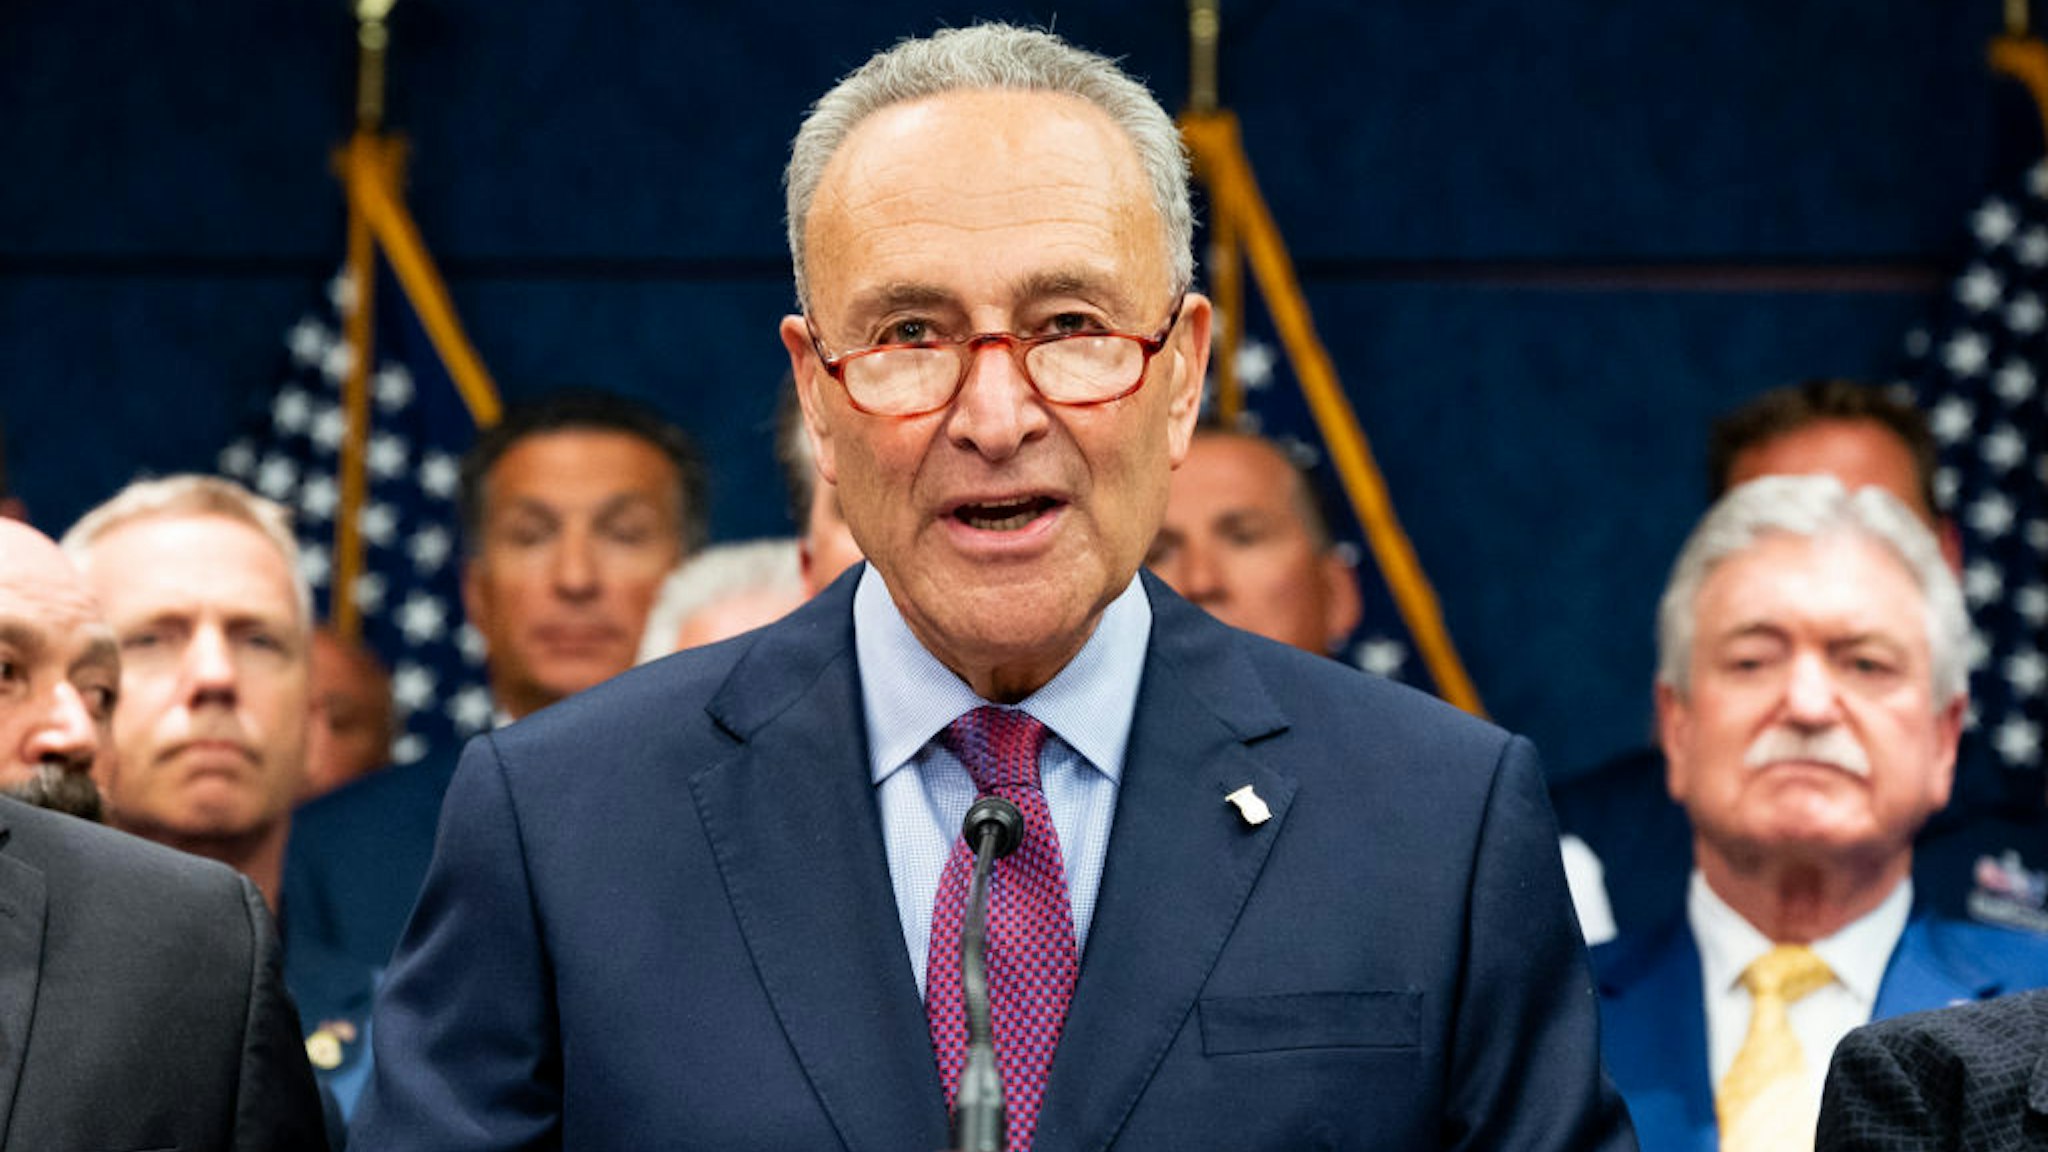 WASHINGTON, DC, UNITED STATES - 2019/07/23: U.S. Senator Chuck Schumer (D-NY) speaking at the press conference held after the passage of H.R.1327 - Never Forget the Heroes: James Zadroga, Ray Pfeifer, and Luis Alvarez Permanent Authorization of the September 11th Victim Compensation Fund Act at the Capitol in Washington, DC on July 23, 2019.